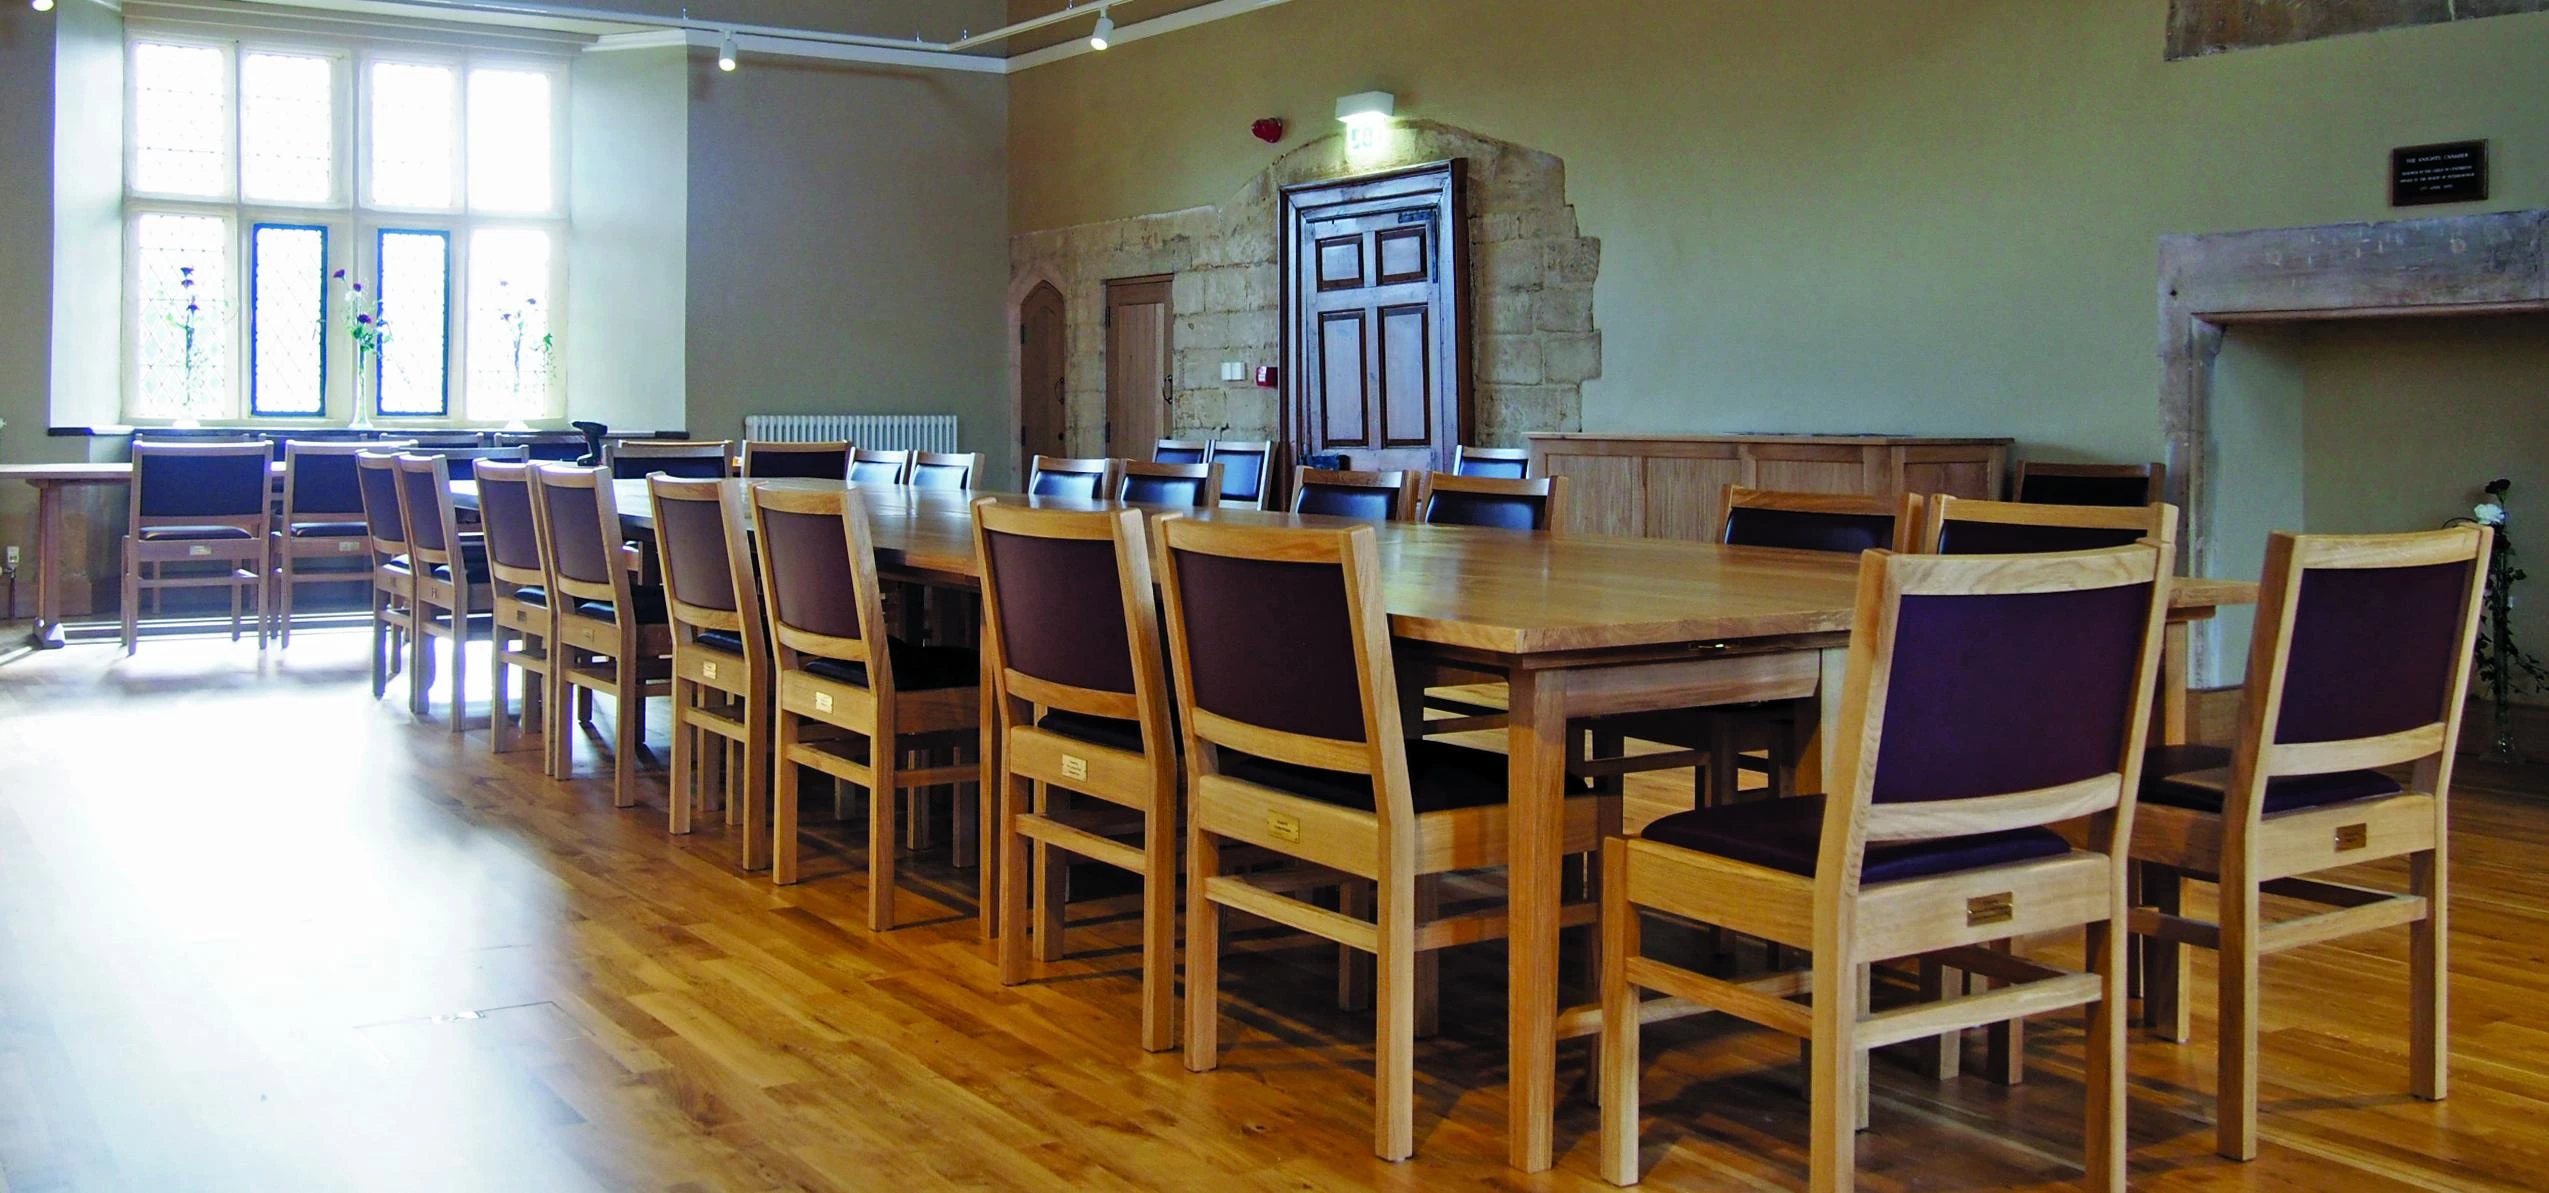 The Knights Chamber featuring Treske's bespoke furniture.